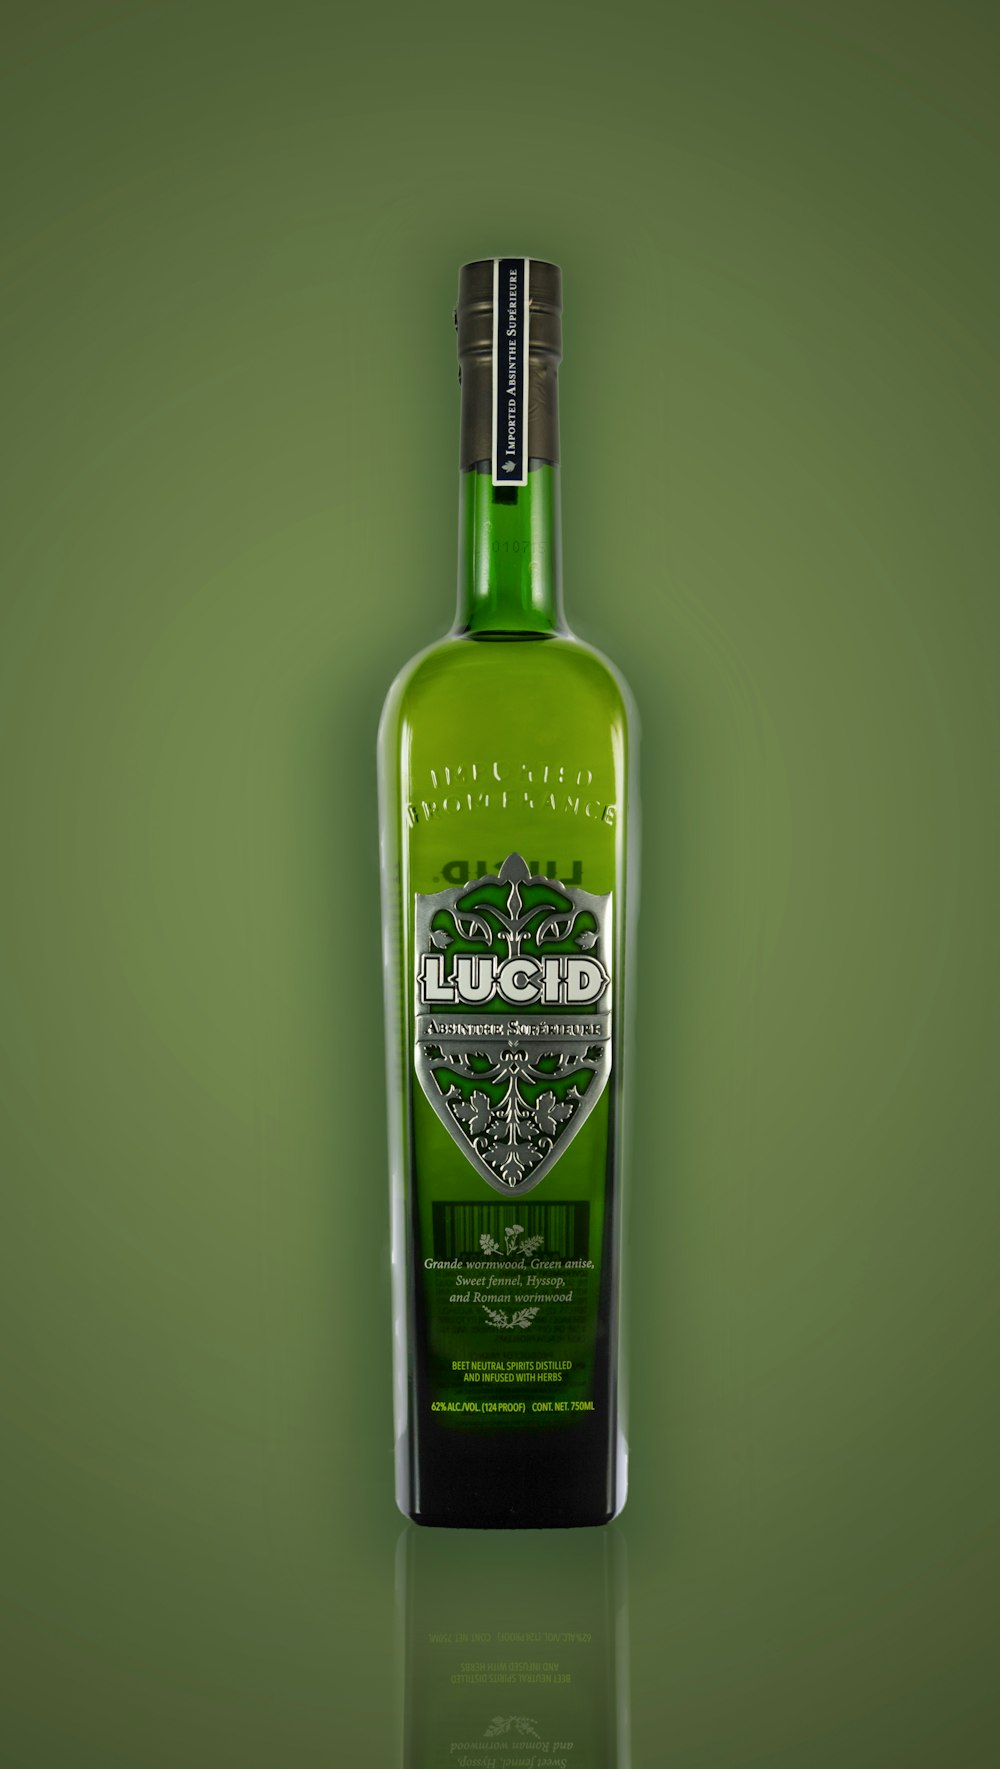 a bottle of liquor on a green background